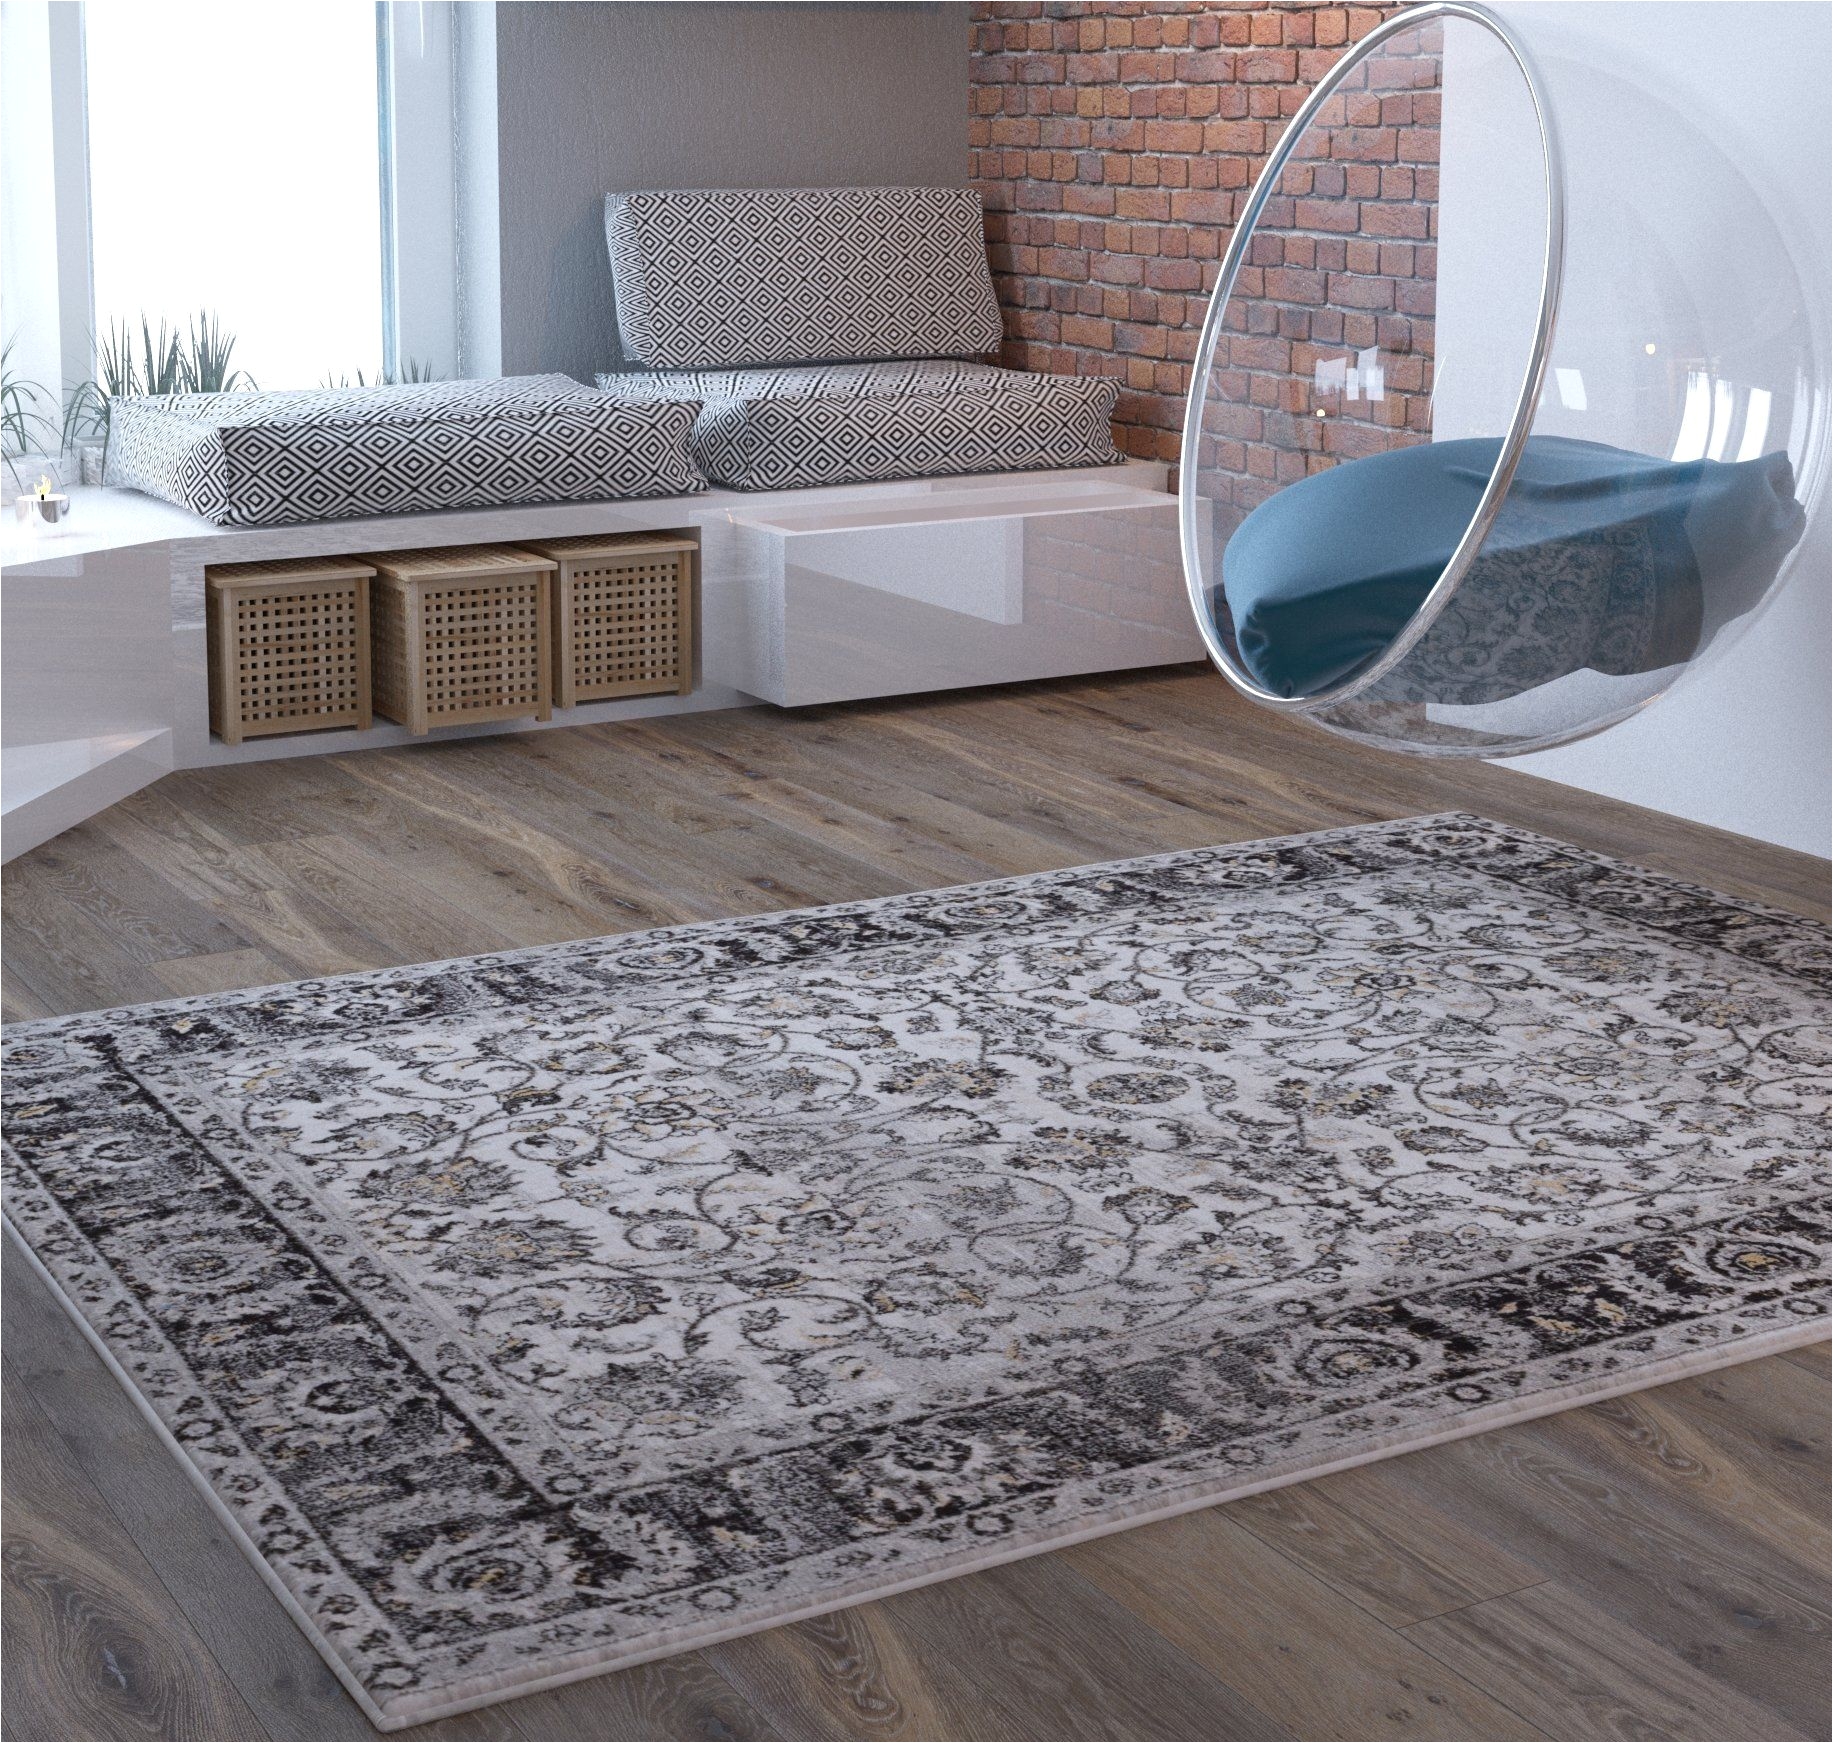 5×7 area Rugs Under 50 Beige Traditional Distressed 5 X 7 53 X 73 area Rug Modern